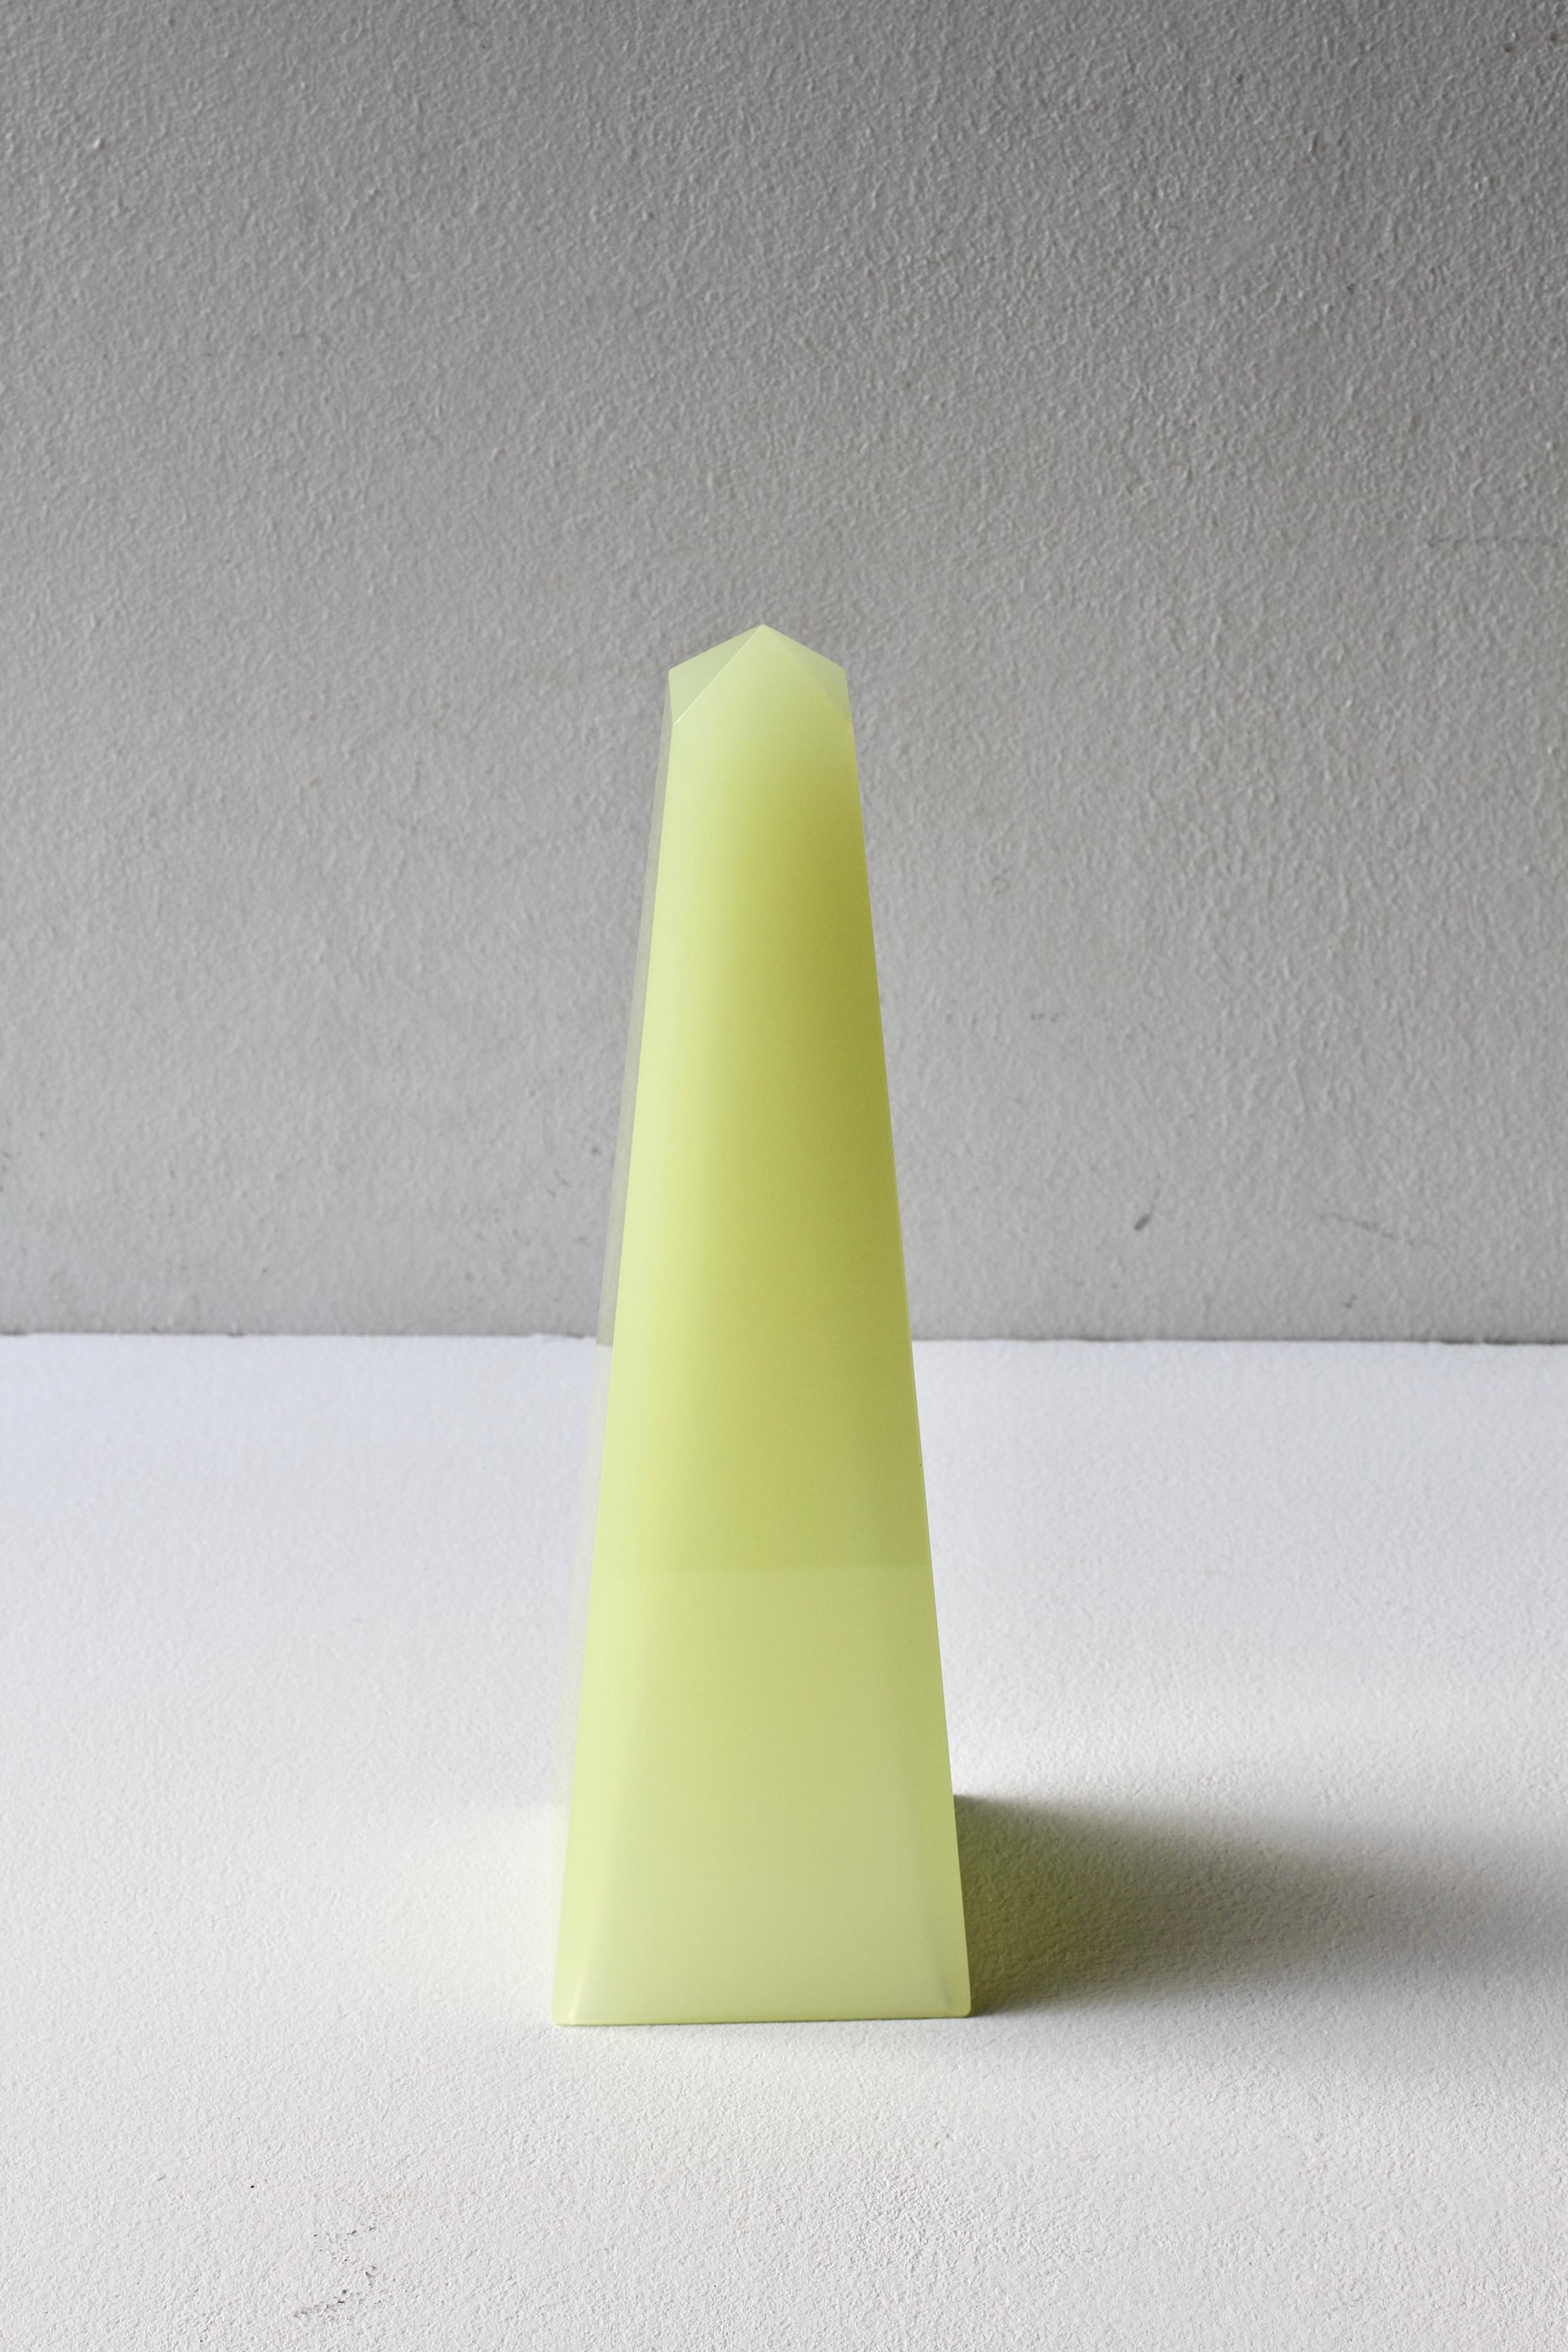 Cenedese vintage midcentury modern tall and rare 'new old stock' polished faceted Murano glass obelisk in a beautiful light neon yellow colored / coloured glass, made circa 1970. Wonderful Italian glass and perfect as an interesting and decorative